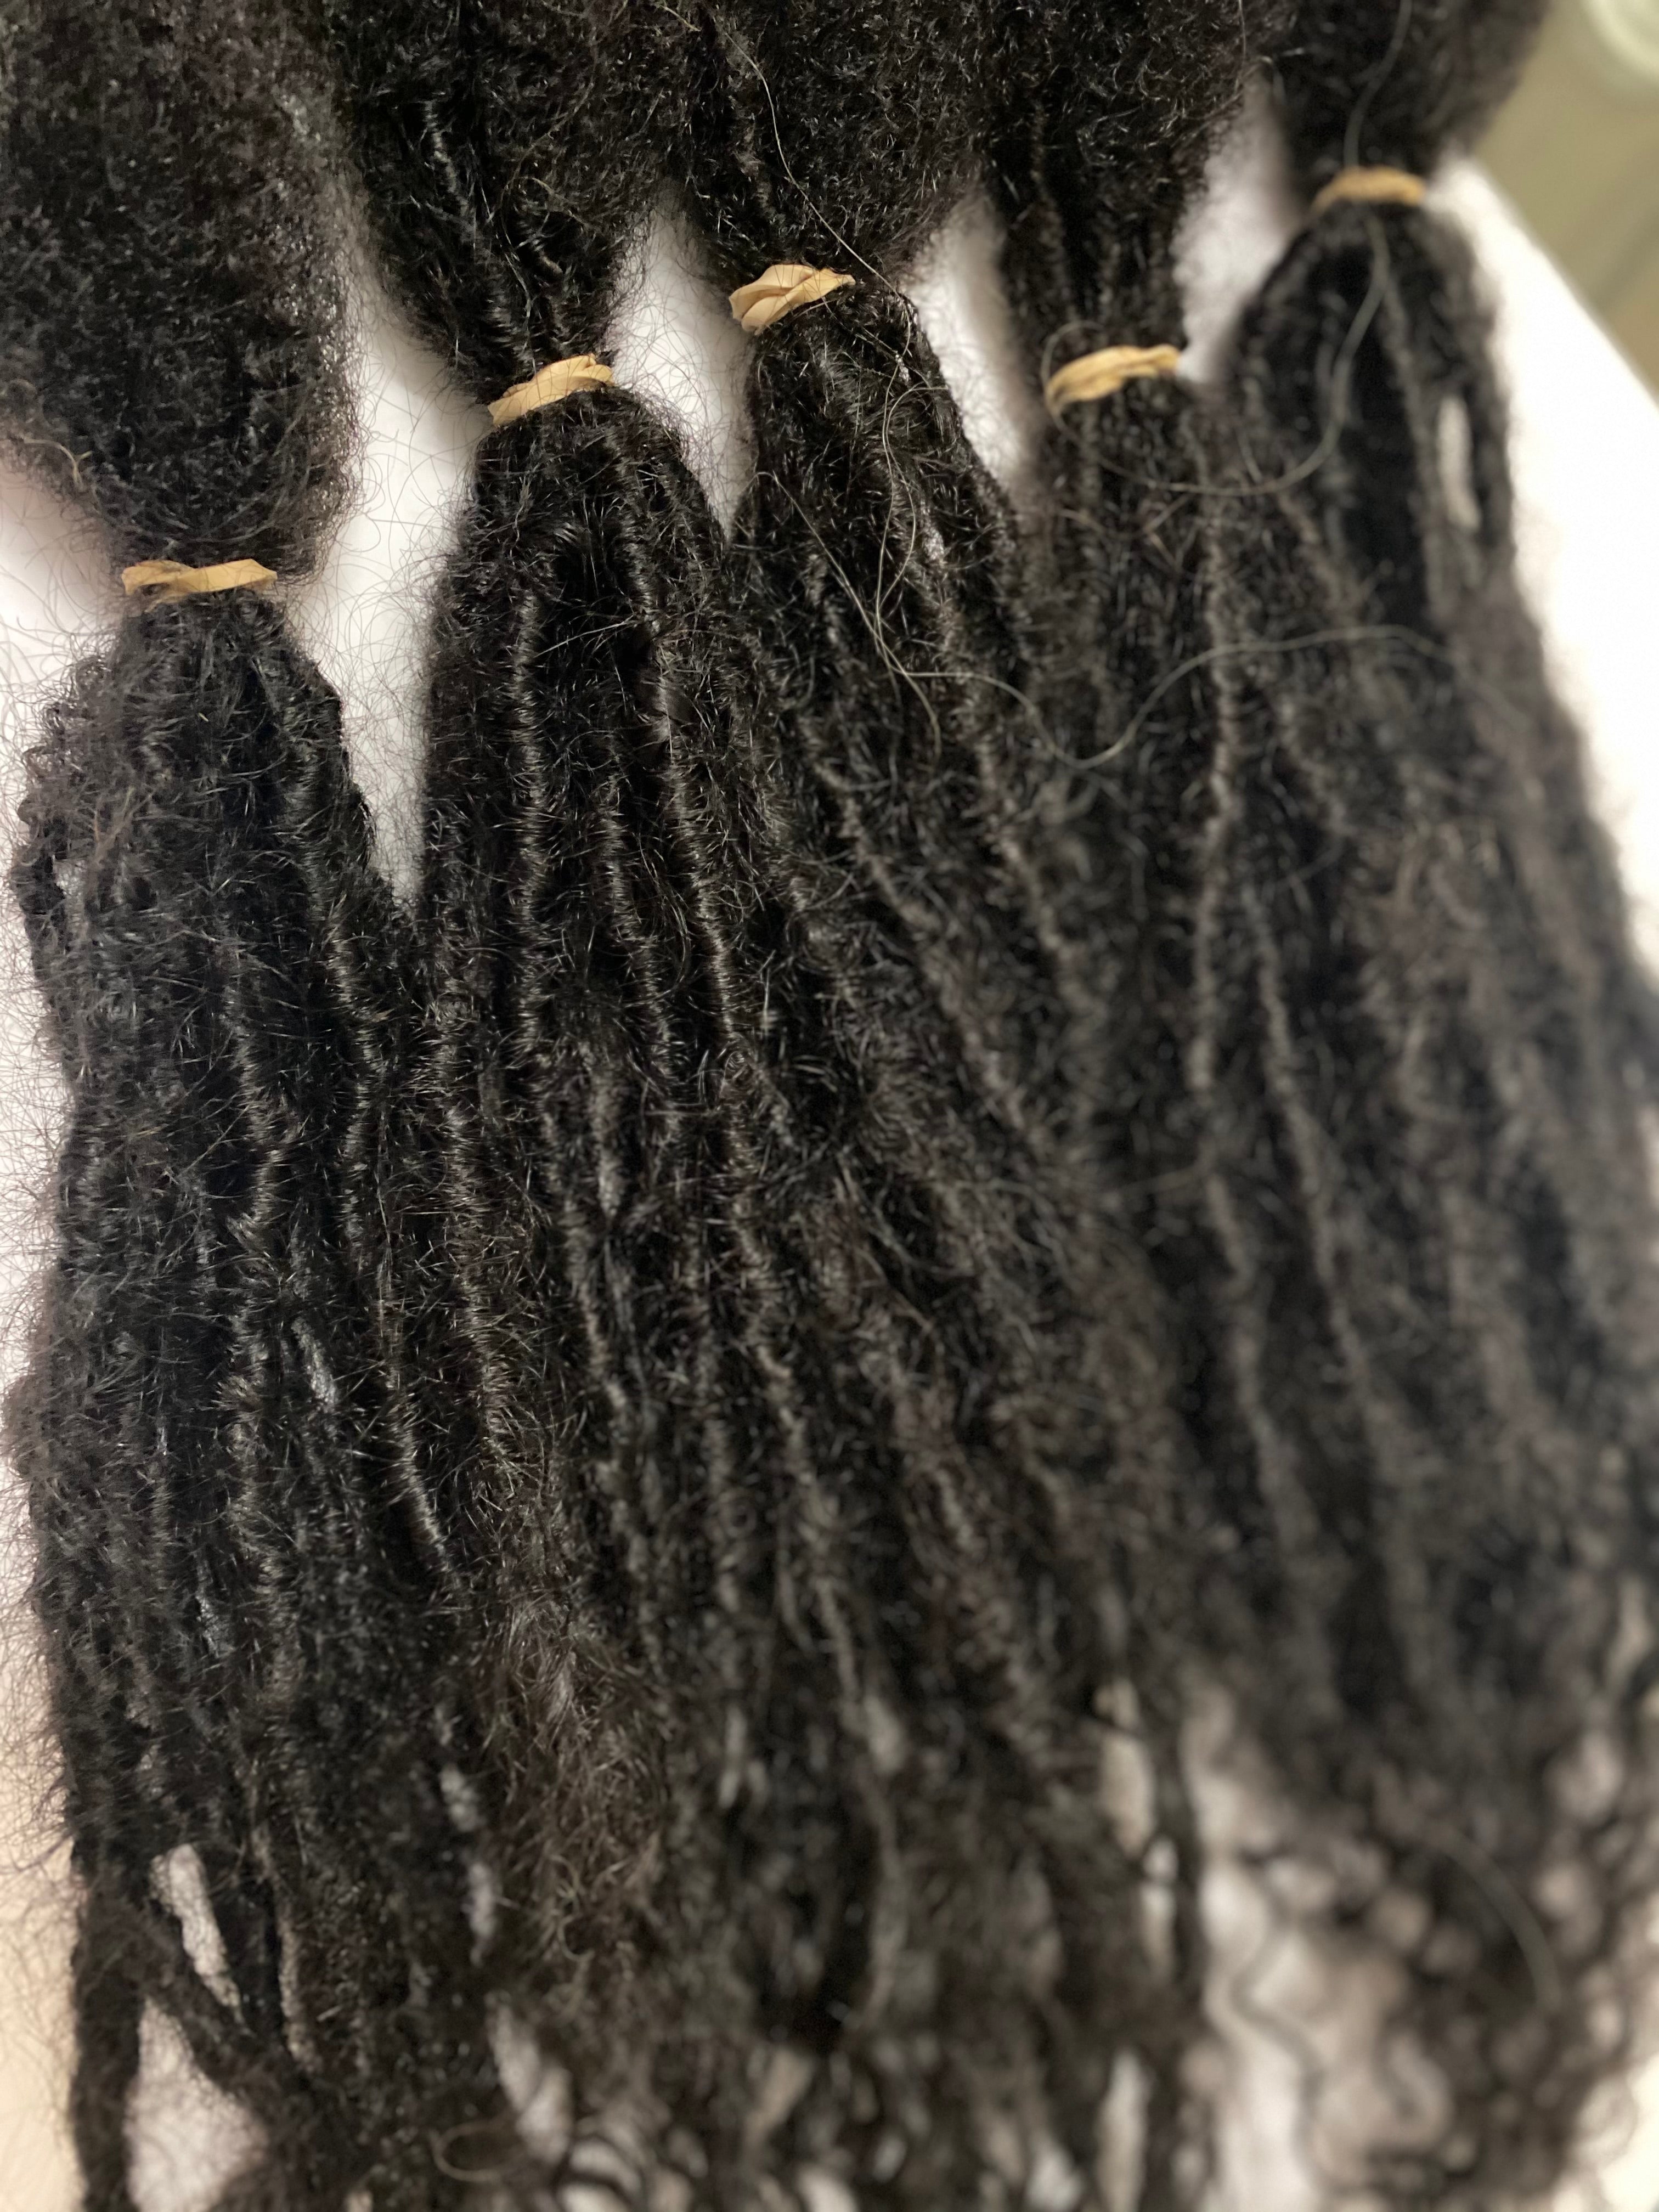 Human Hair Extensions Dreadlocks: Items For Individuals